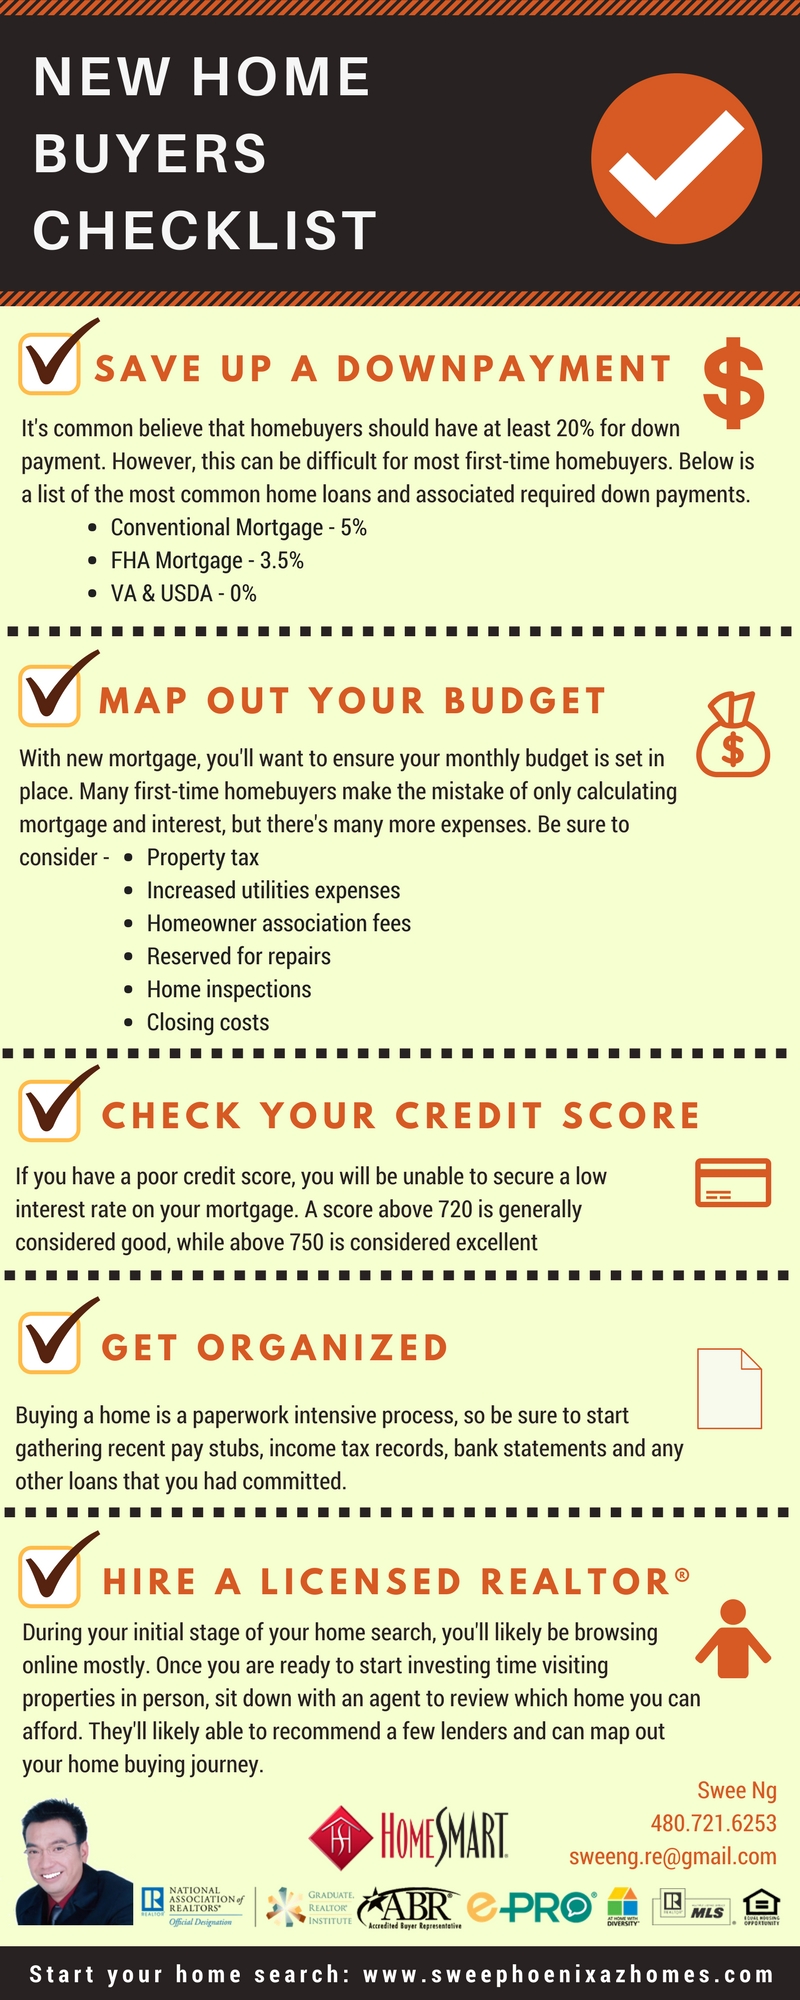 new-home-buyer-checklist-phoenix-az-real-estate-and-homes-for-sale